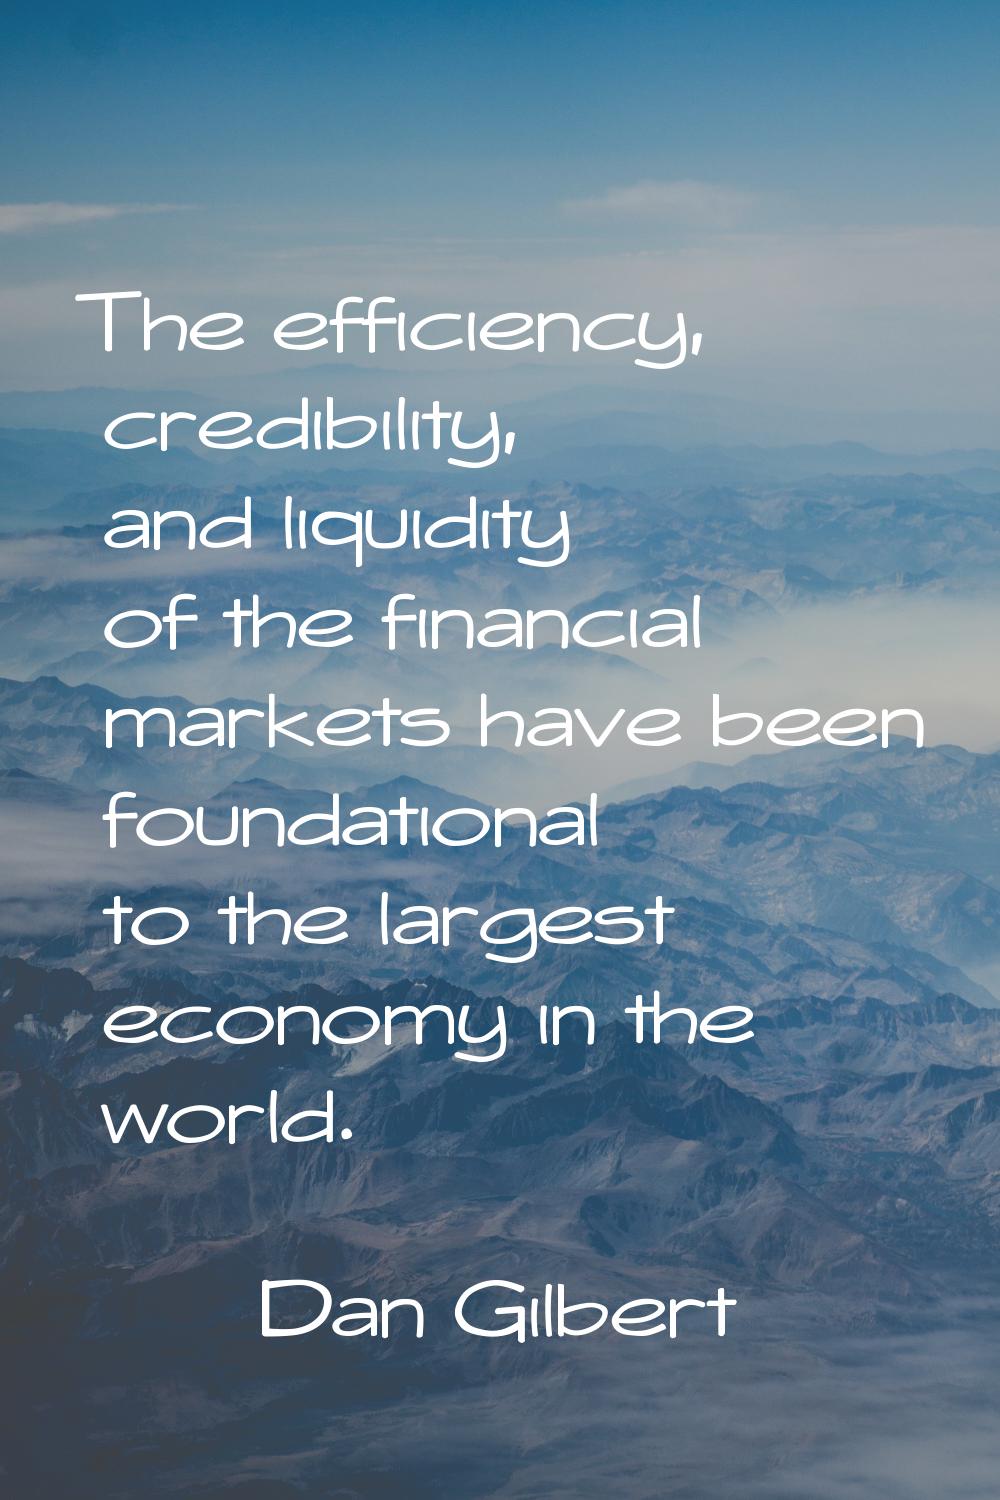 The efficiency, credibility, and liquidity of the financial markets have been foundational to the l